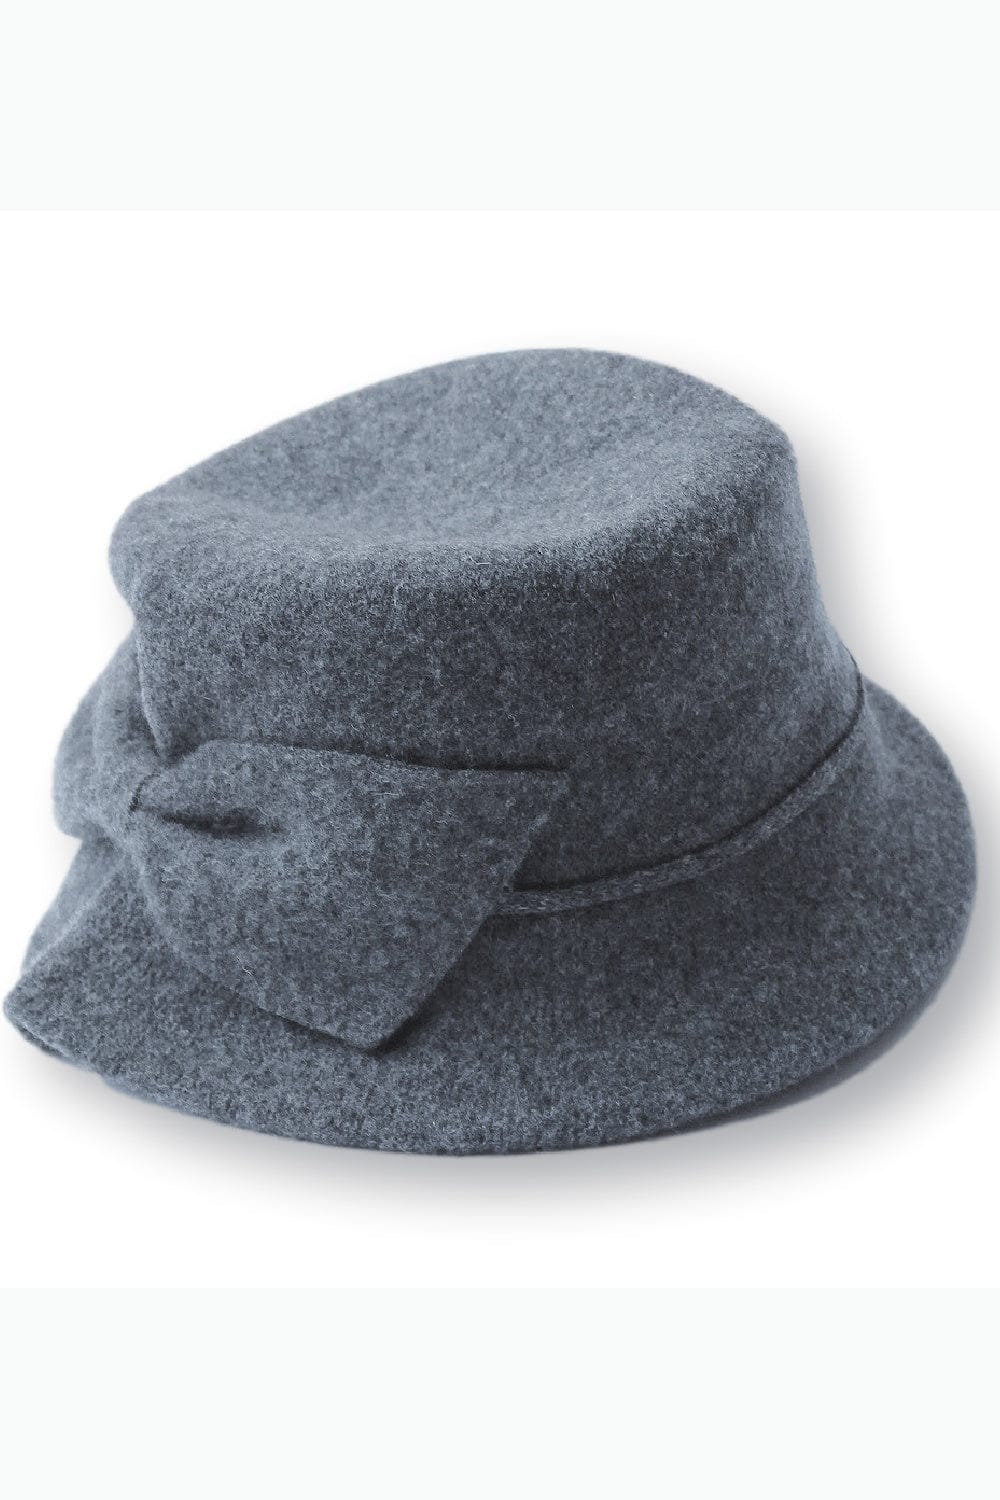 Women's bucket hat with side bow. Hat is merino wool and a grey color.